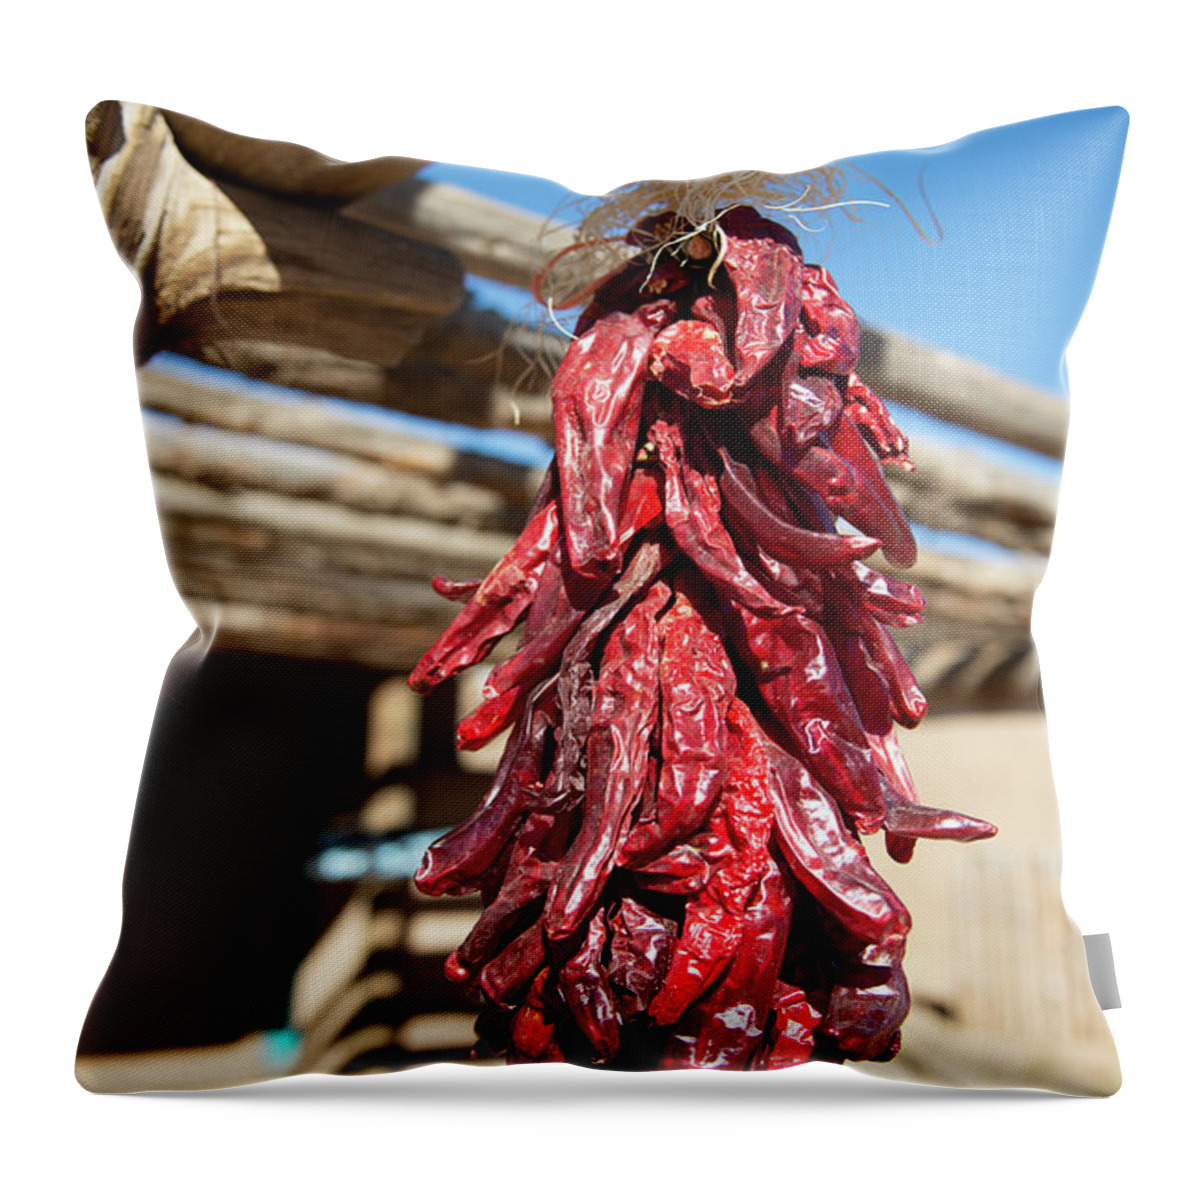 New Mexico Throw Pillow featuring the photograph Taos Ristra by Jennifer Kane Webb